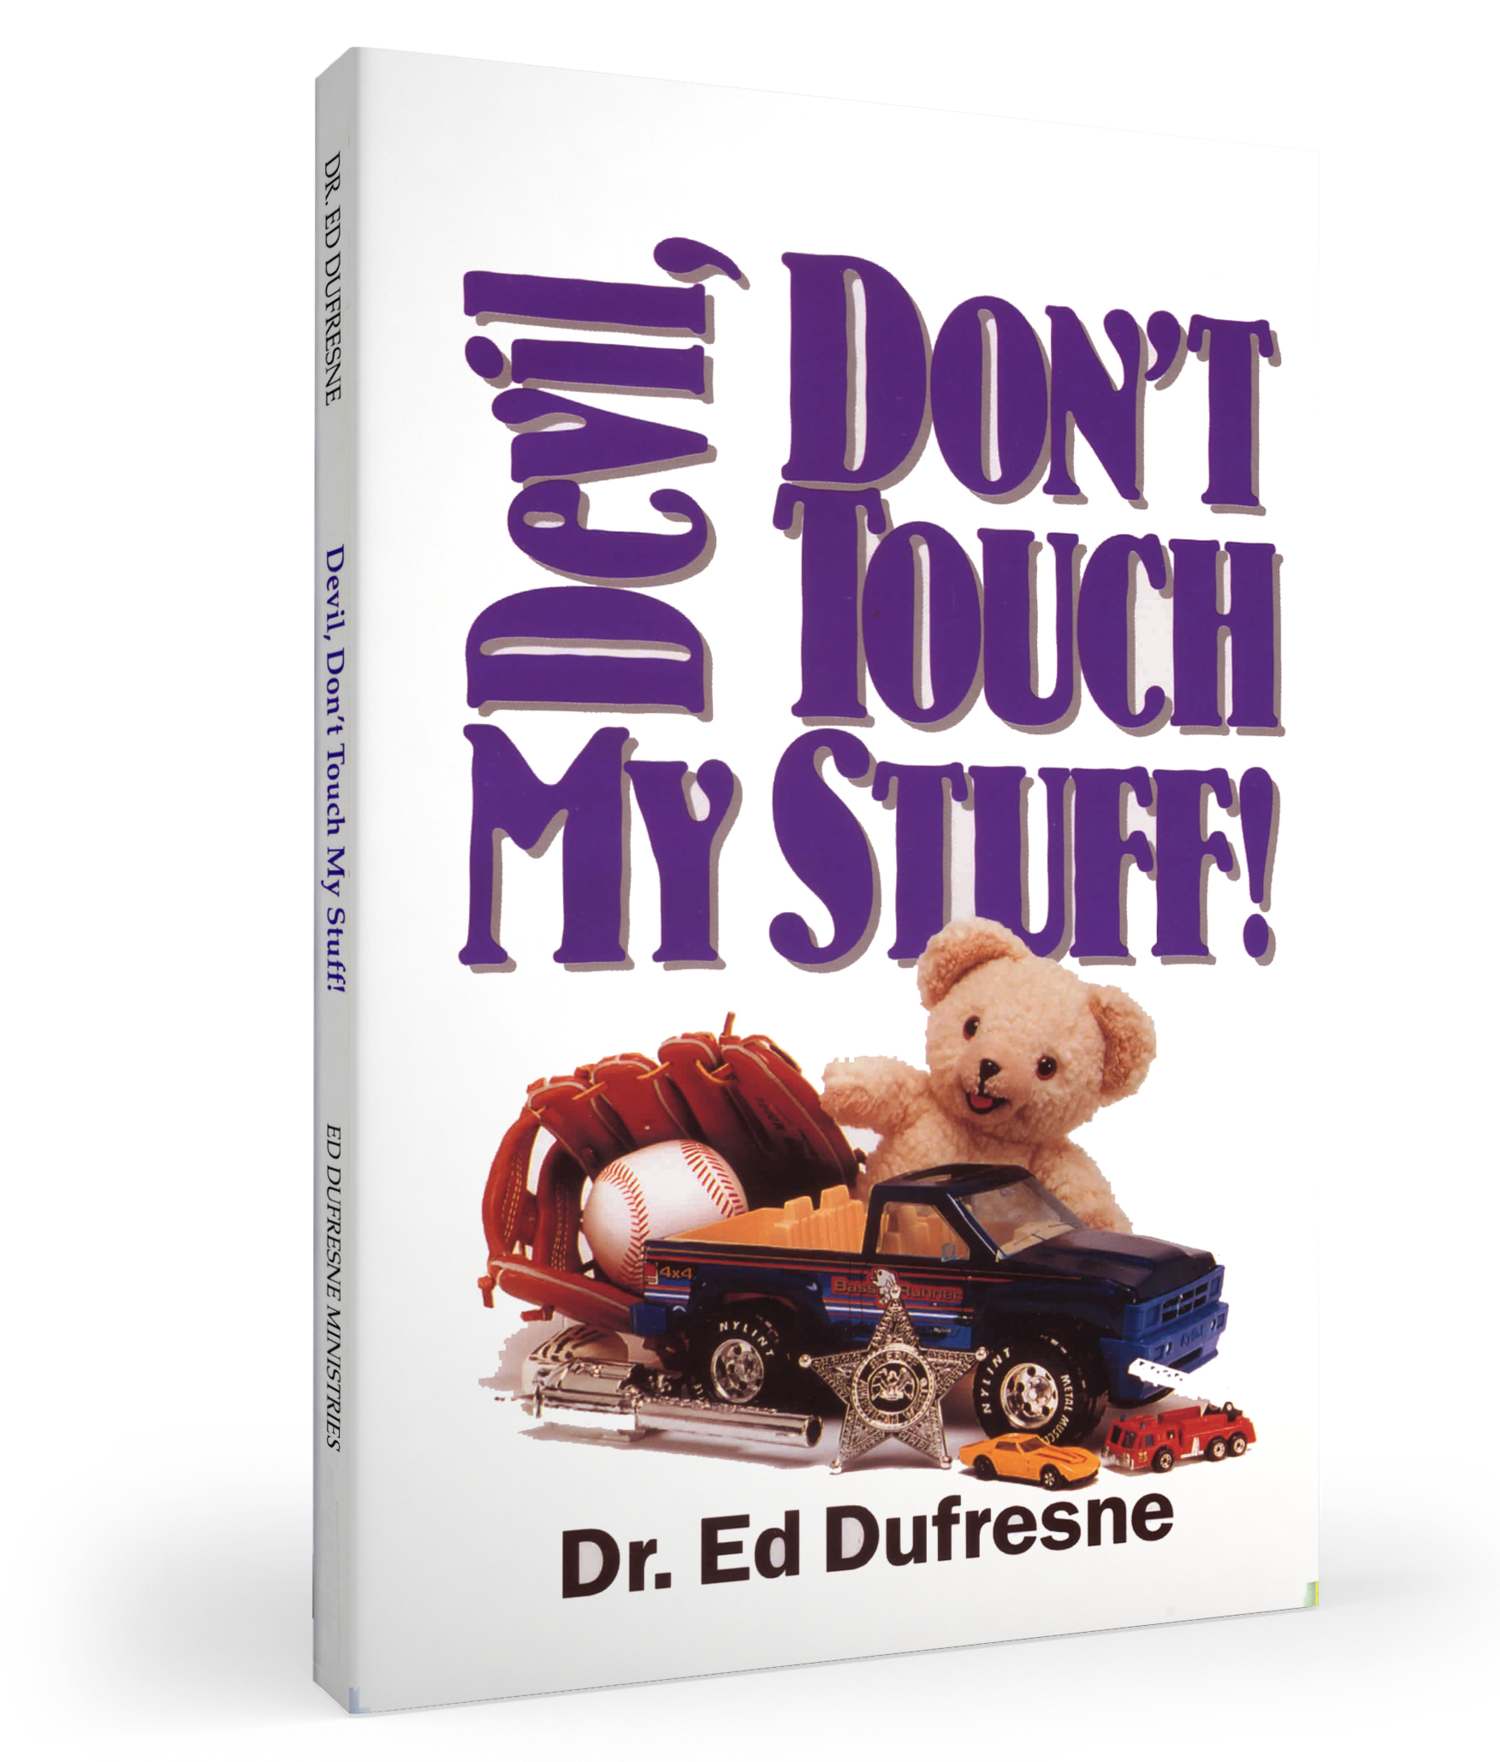 Devil, Don't Touch My Stuff! (Dr. Ed Dufresne) — Dufresne Ministries